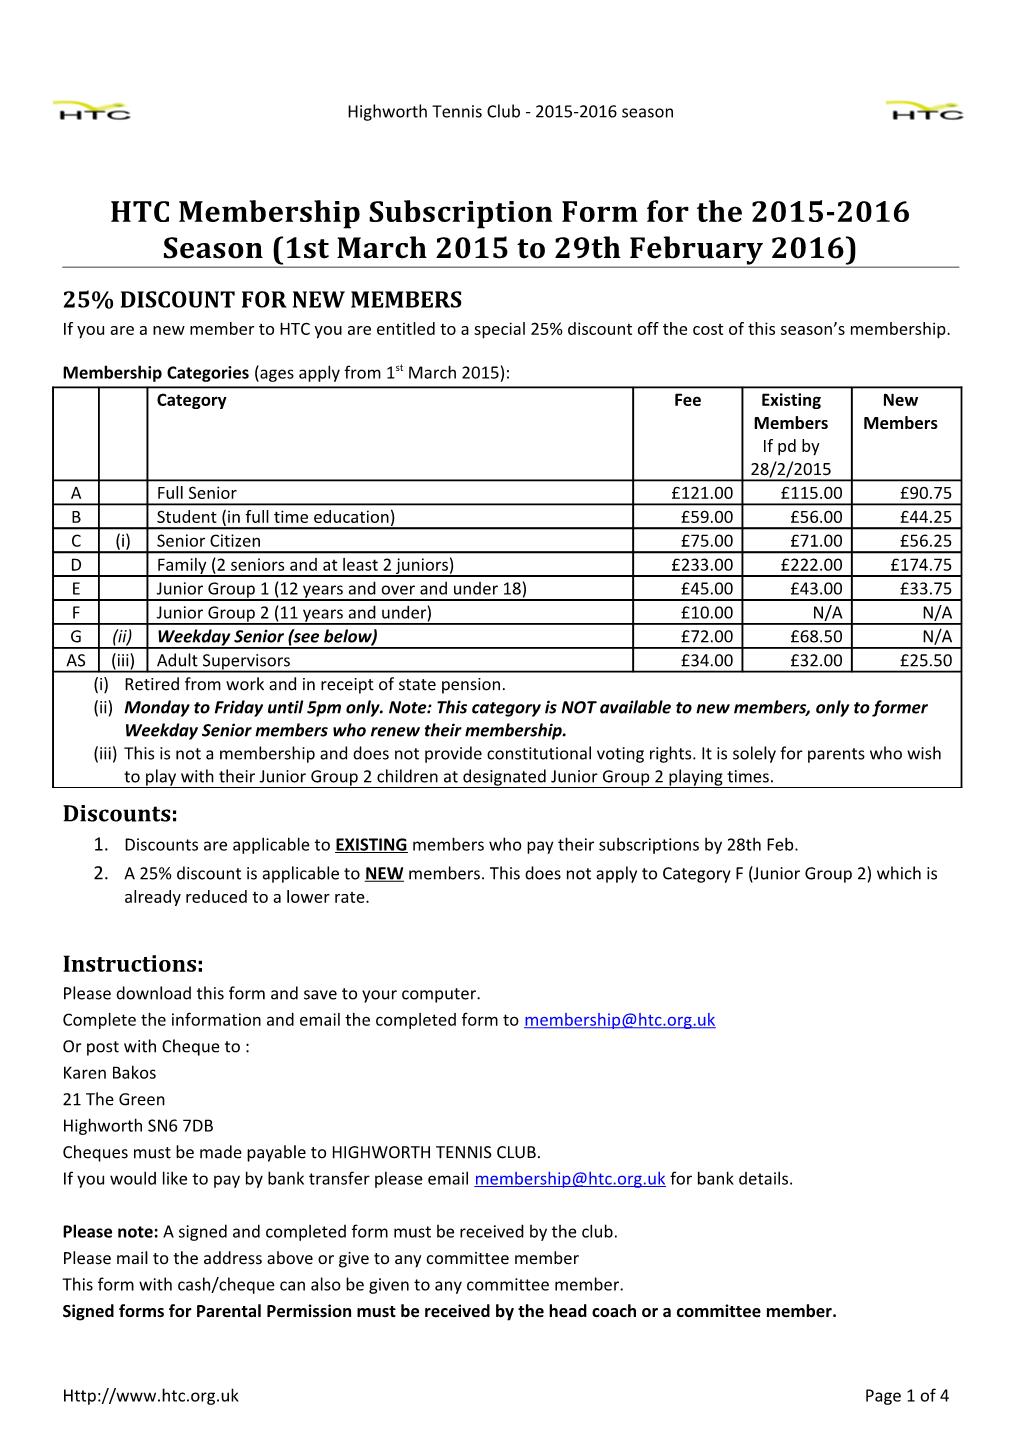 HTC Membership Subscription Form for the 2015-2016Season (1St March 2015 to 29Thfebruary 2016)